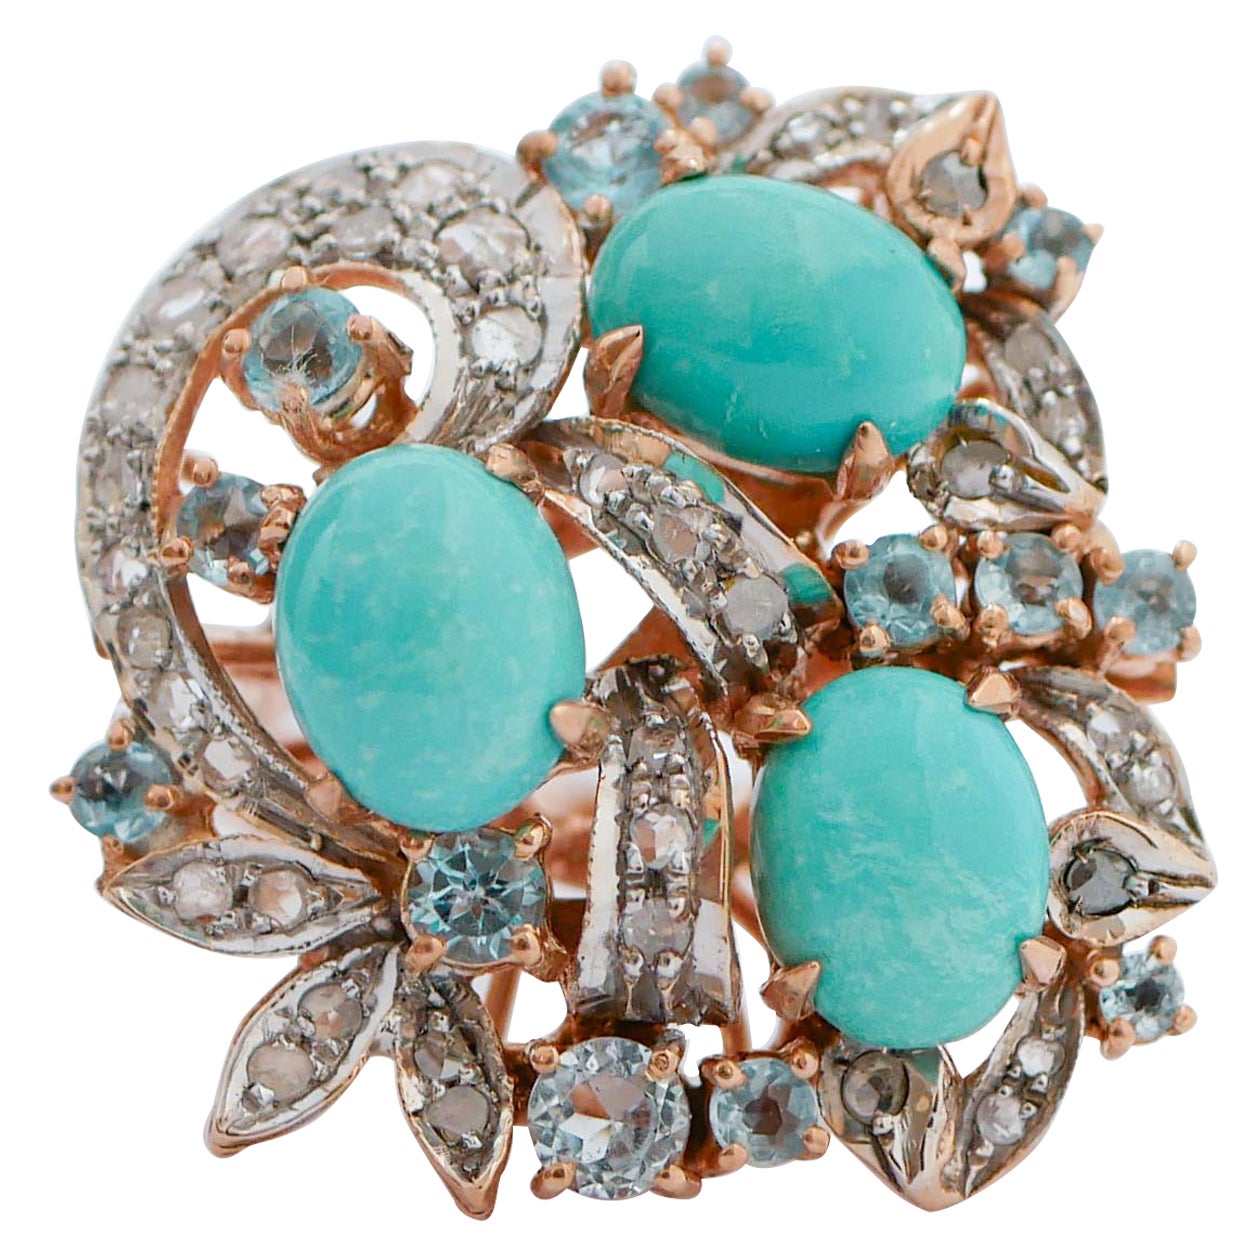 Aquamarine Colour Topazs, Turquoises, Diamonds, 14 Kt Rose Gold and Silver Ring.